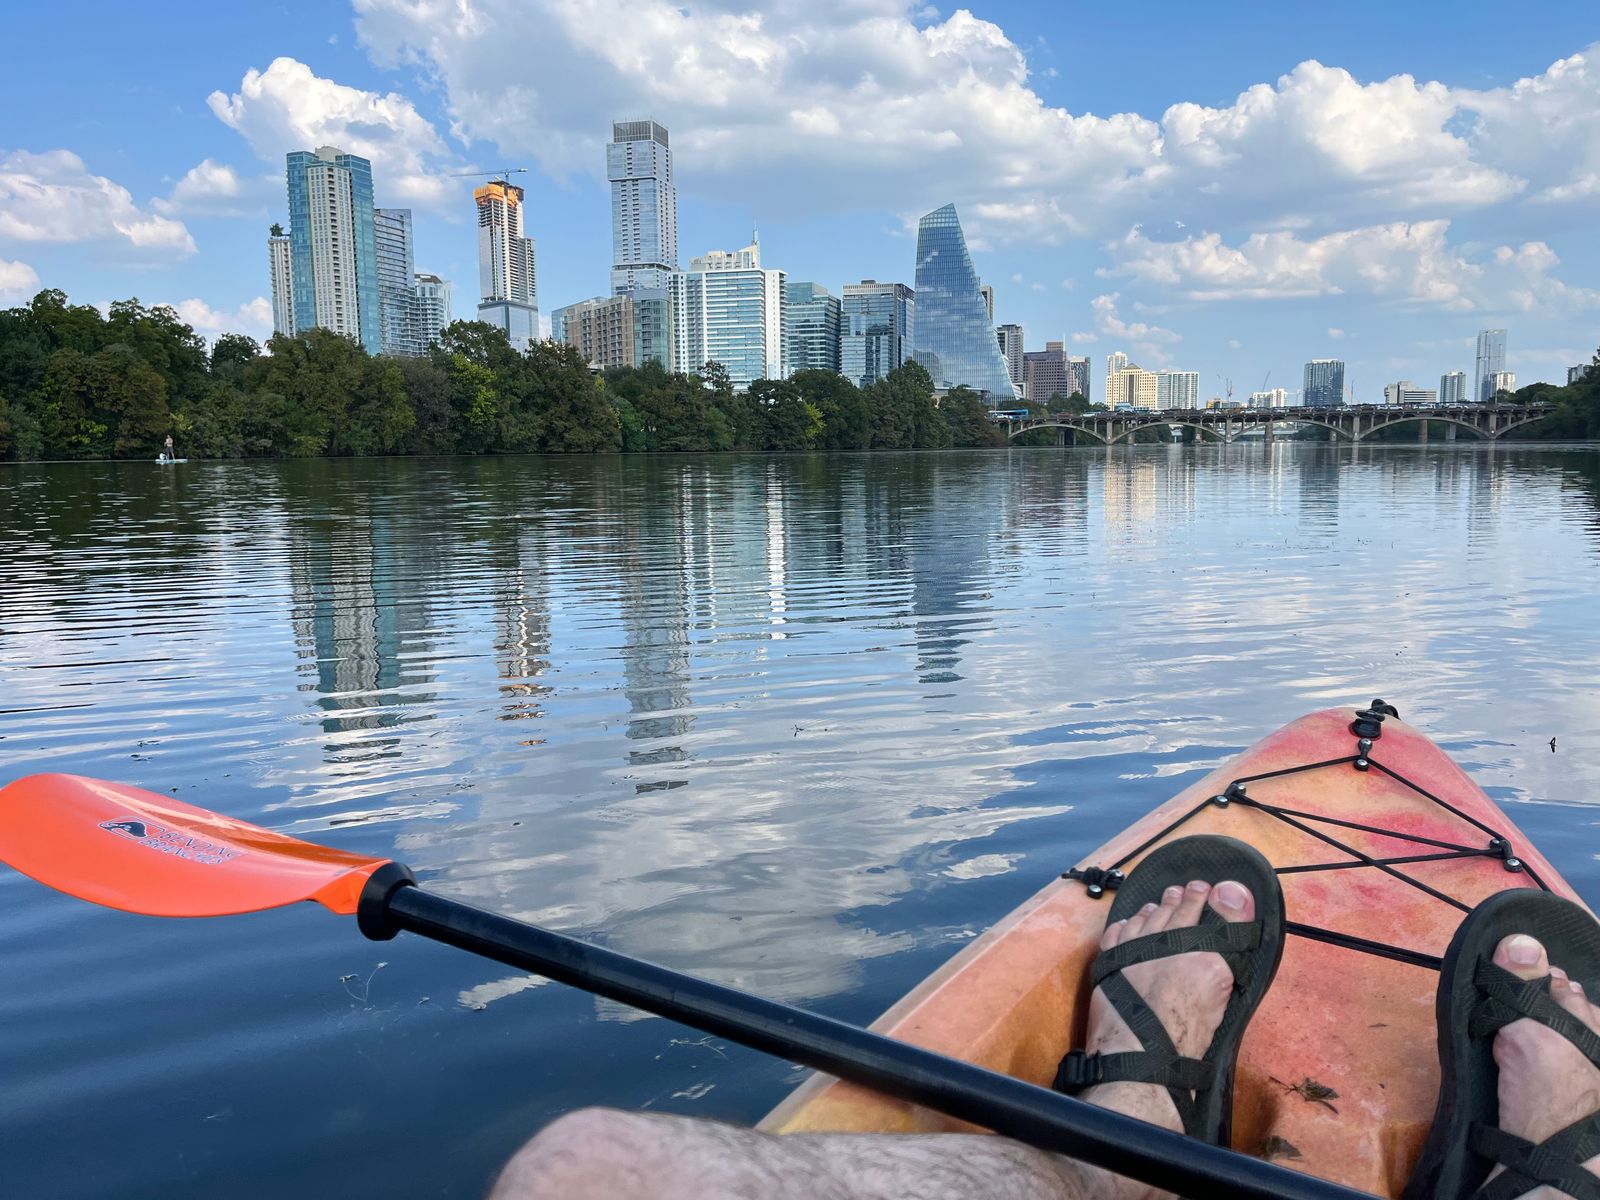 Kayaking in downtown Austin with the city skyline in the background